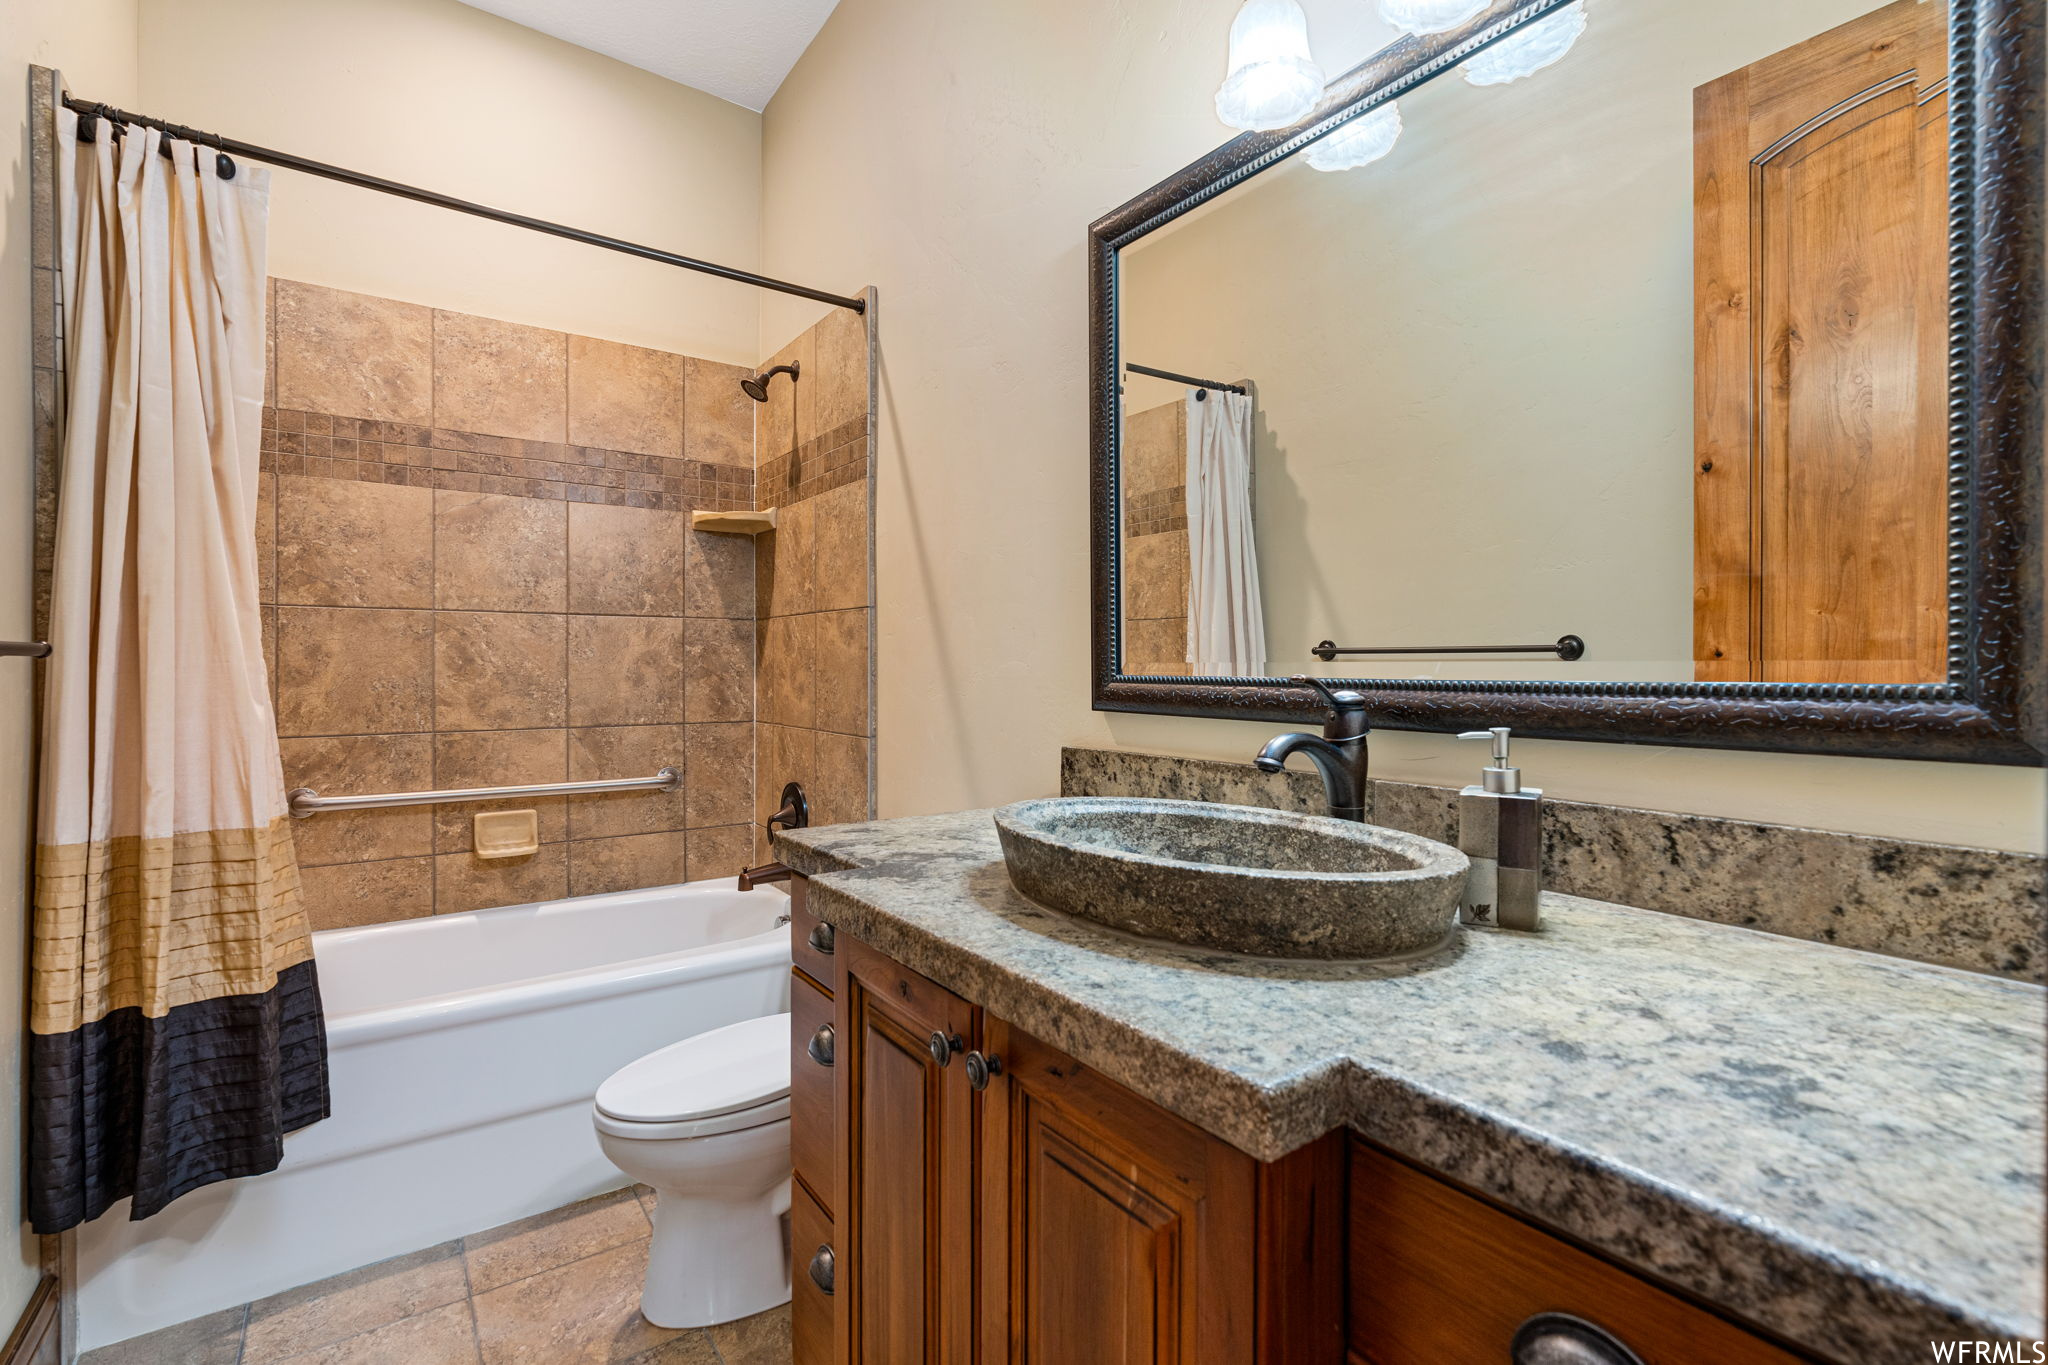 Full bathroom with tile floors, toilet, vanity with extensive cabinet space, and shower / bath combo with shower curtain